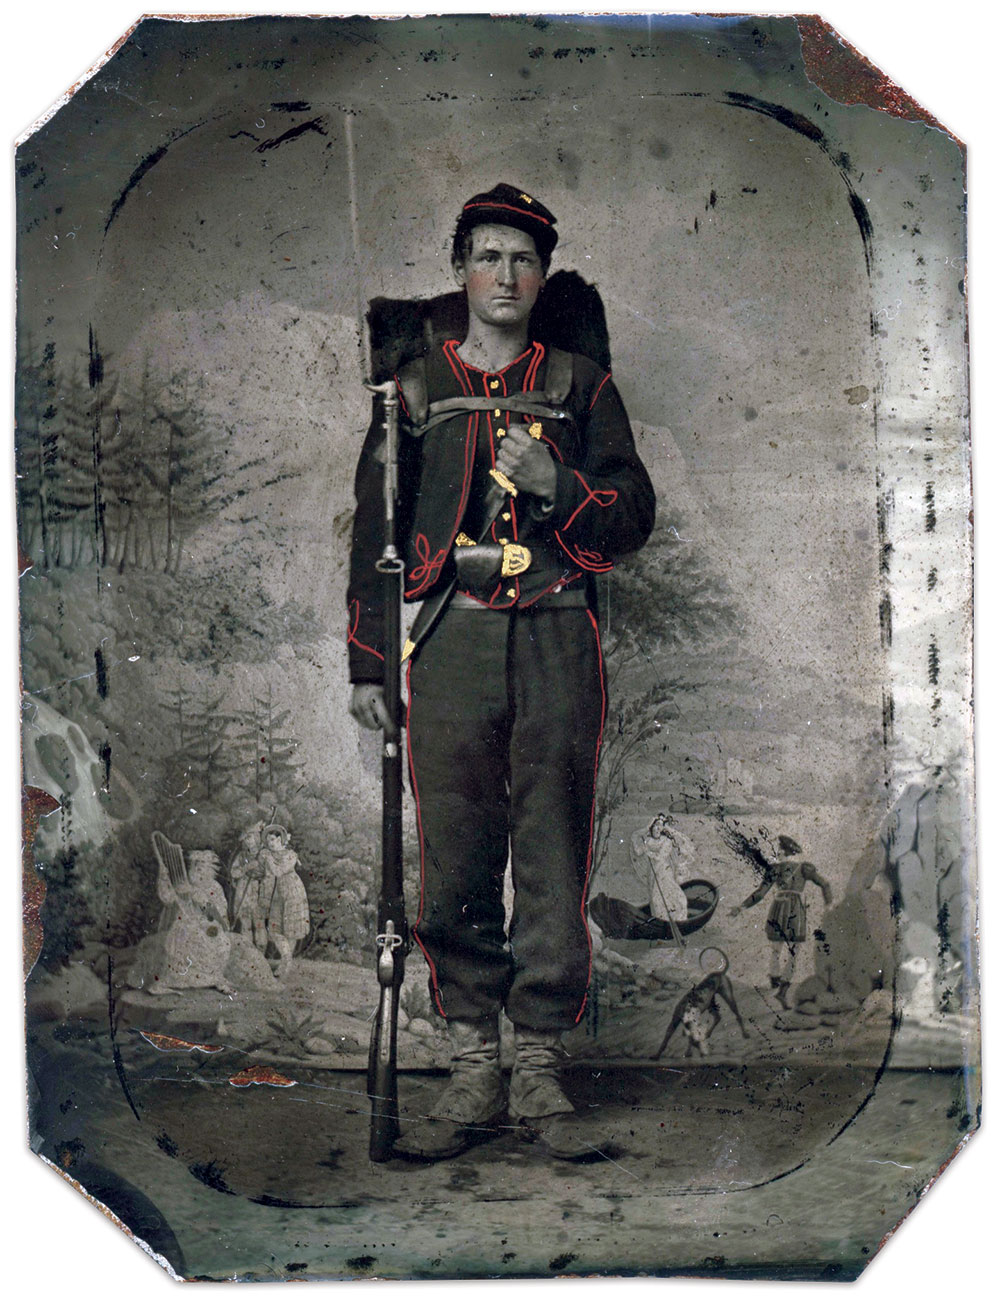 English immigrant James John Bolestridge (1844-1926) mustered into Company K of the 23rd in August 1861. He earned his corporal’s chevrons a year later and mustered out in 1864. Quarter plate tintype. Paul Russinoff Collection.